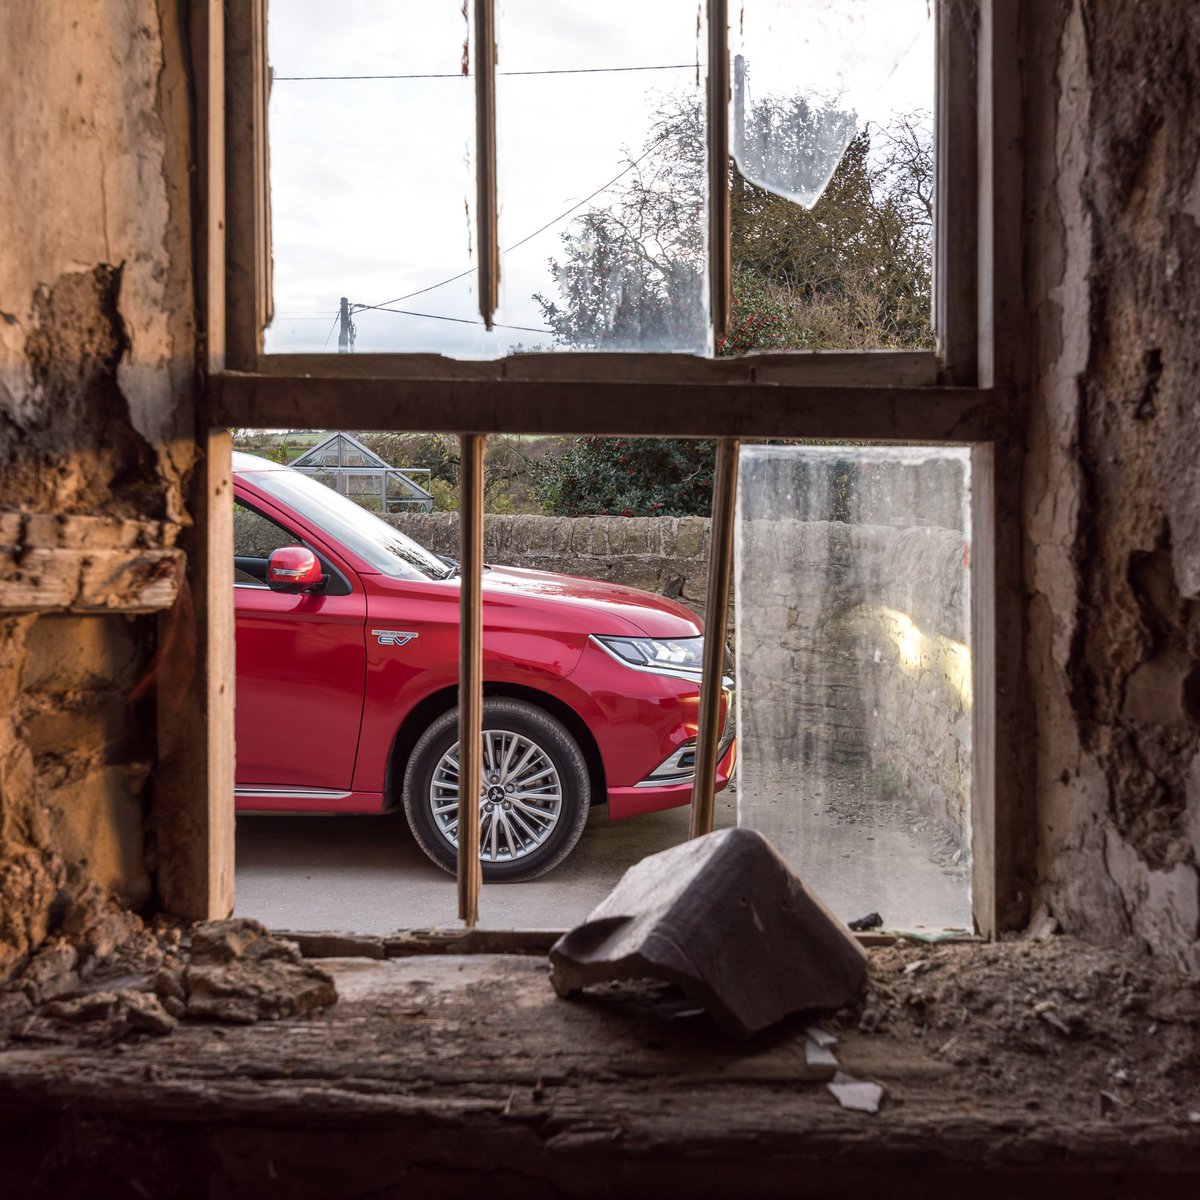 Can you guess the model through the window?
-
#car #model #mitsubishi #newcar #model #guess #carknowledge #mystery